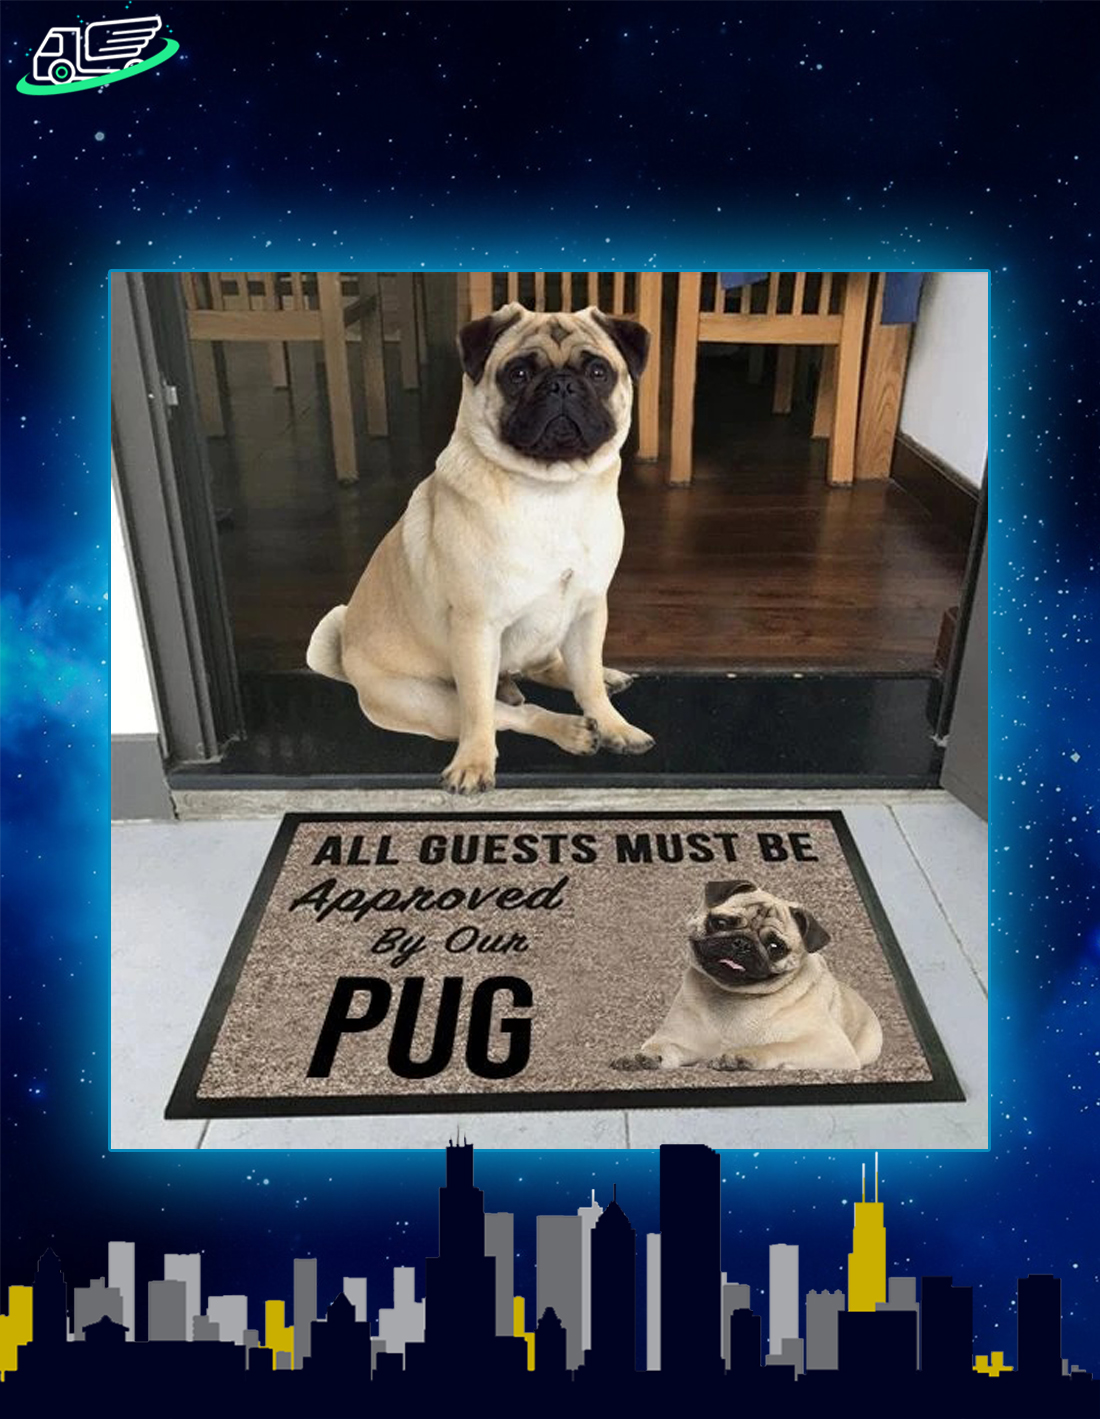 All guests must be approved by our pug doormat